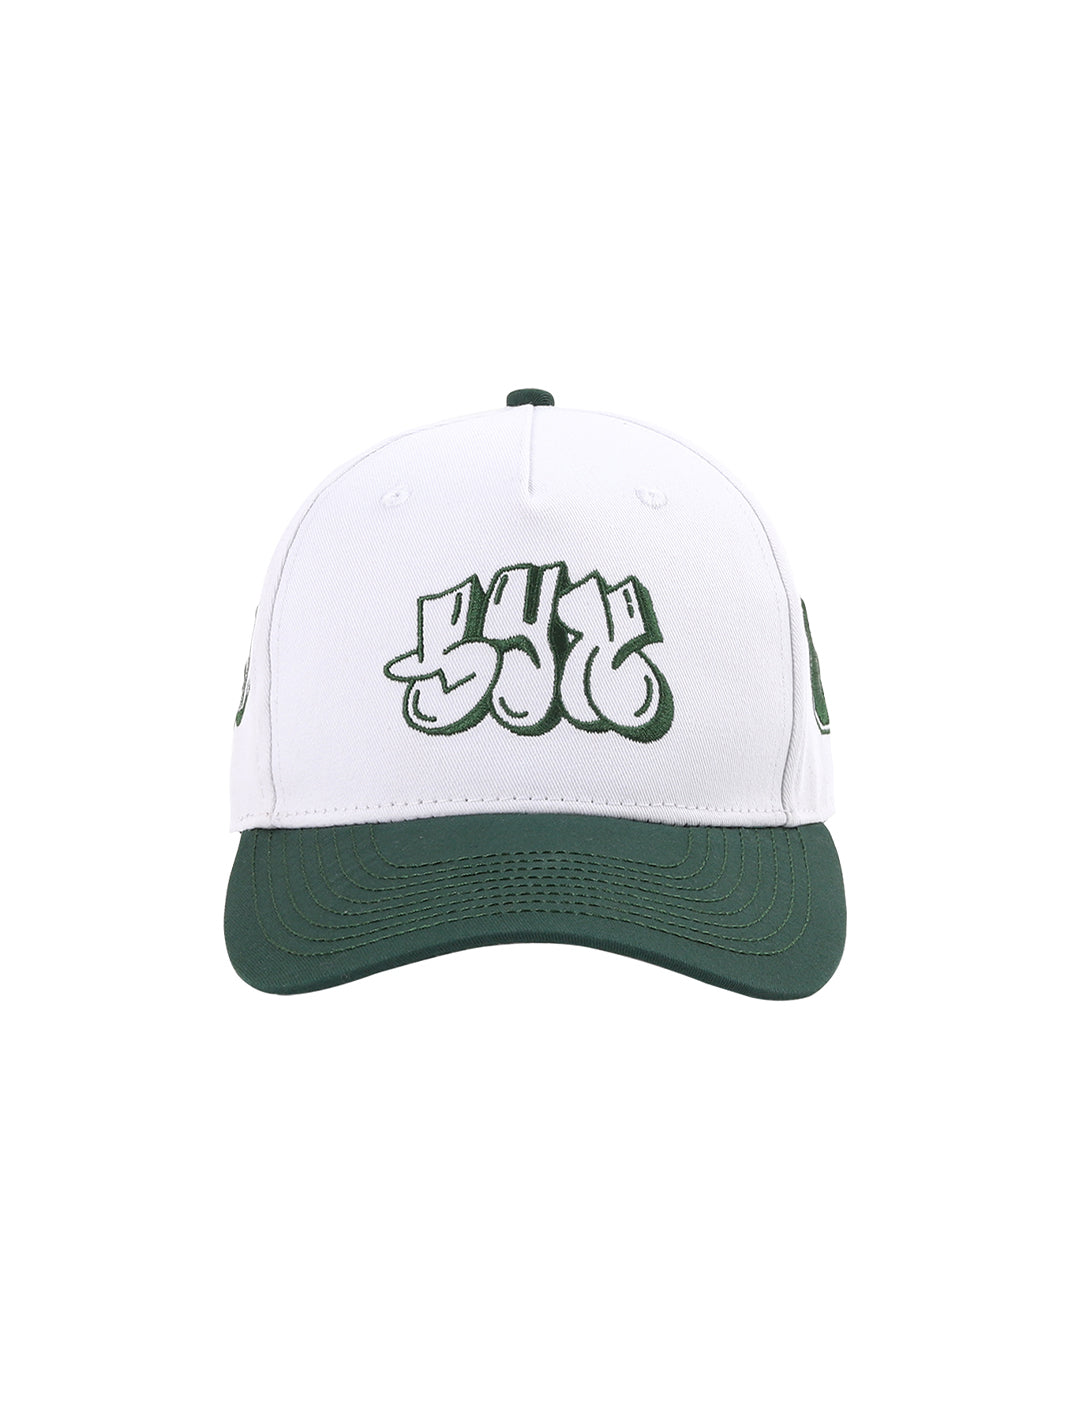 SYX Green/White 5 Panel Adjustable Hat